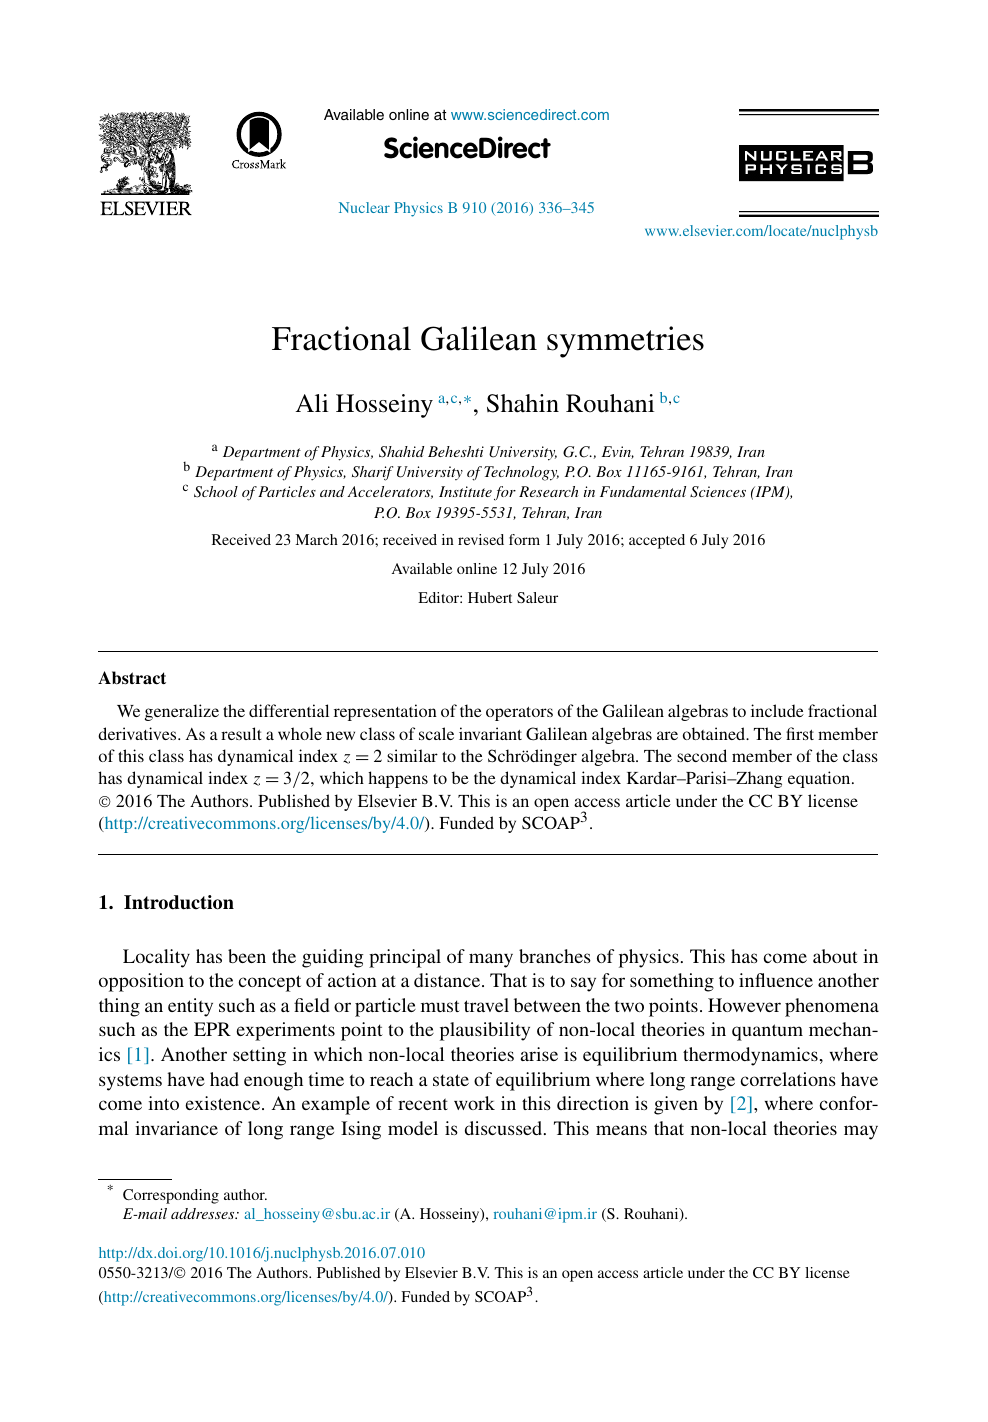 Fractional Galilean Symmetries Topic Of Research Paper In Physical Sciences Download Scholarly Article Pdf And Read For Free On Cyberleninka Open Science Hub